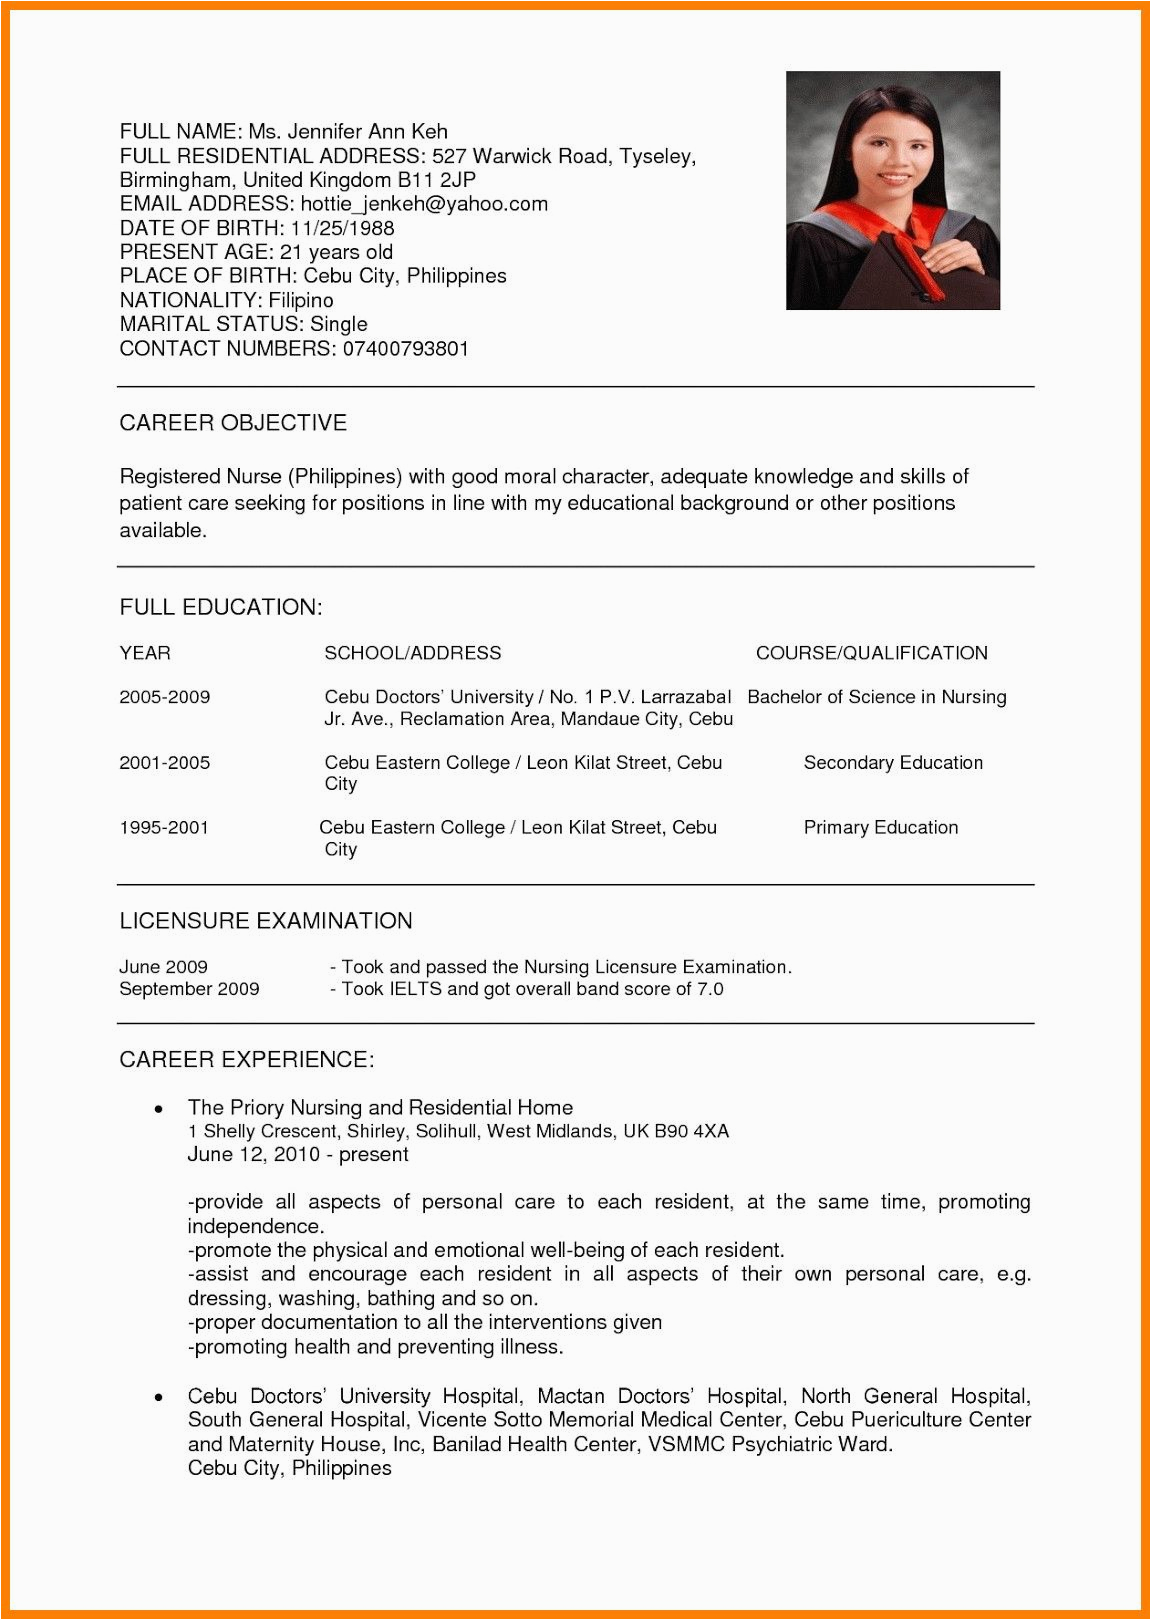 Resume Sample for Nurses In the Philippines Sample Resume format Nurses Philippines